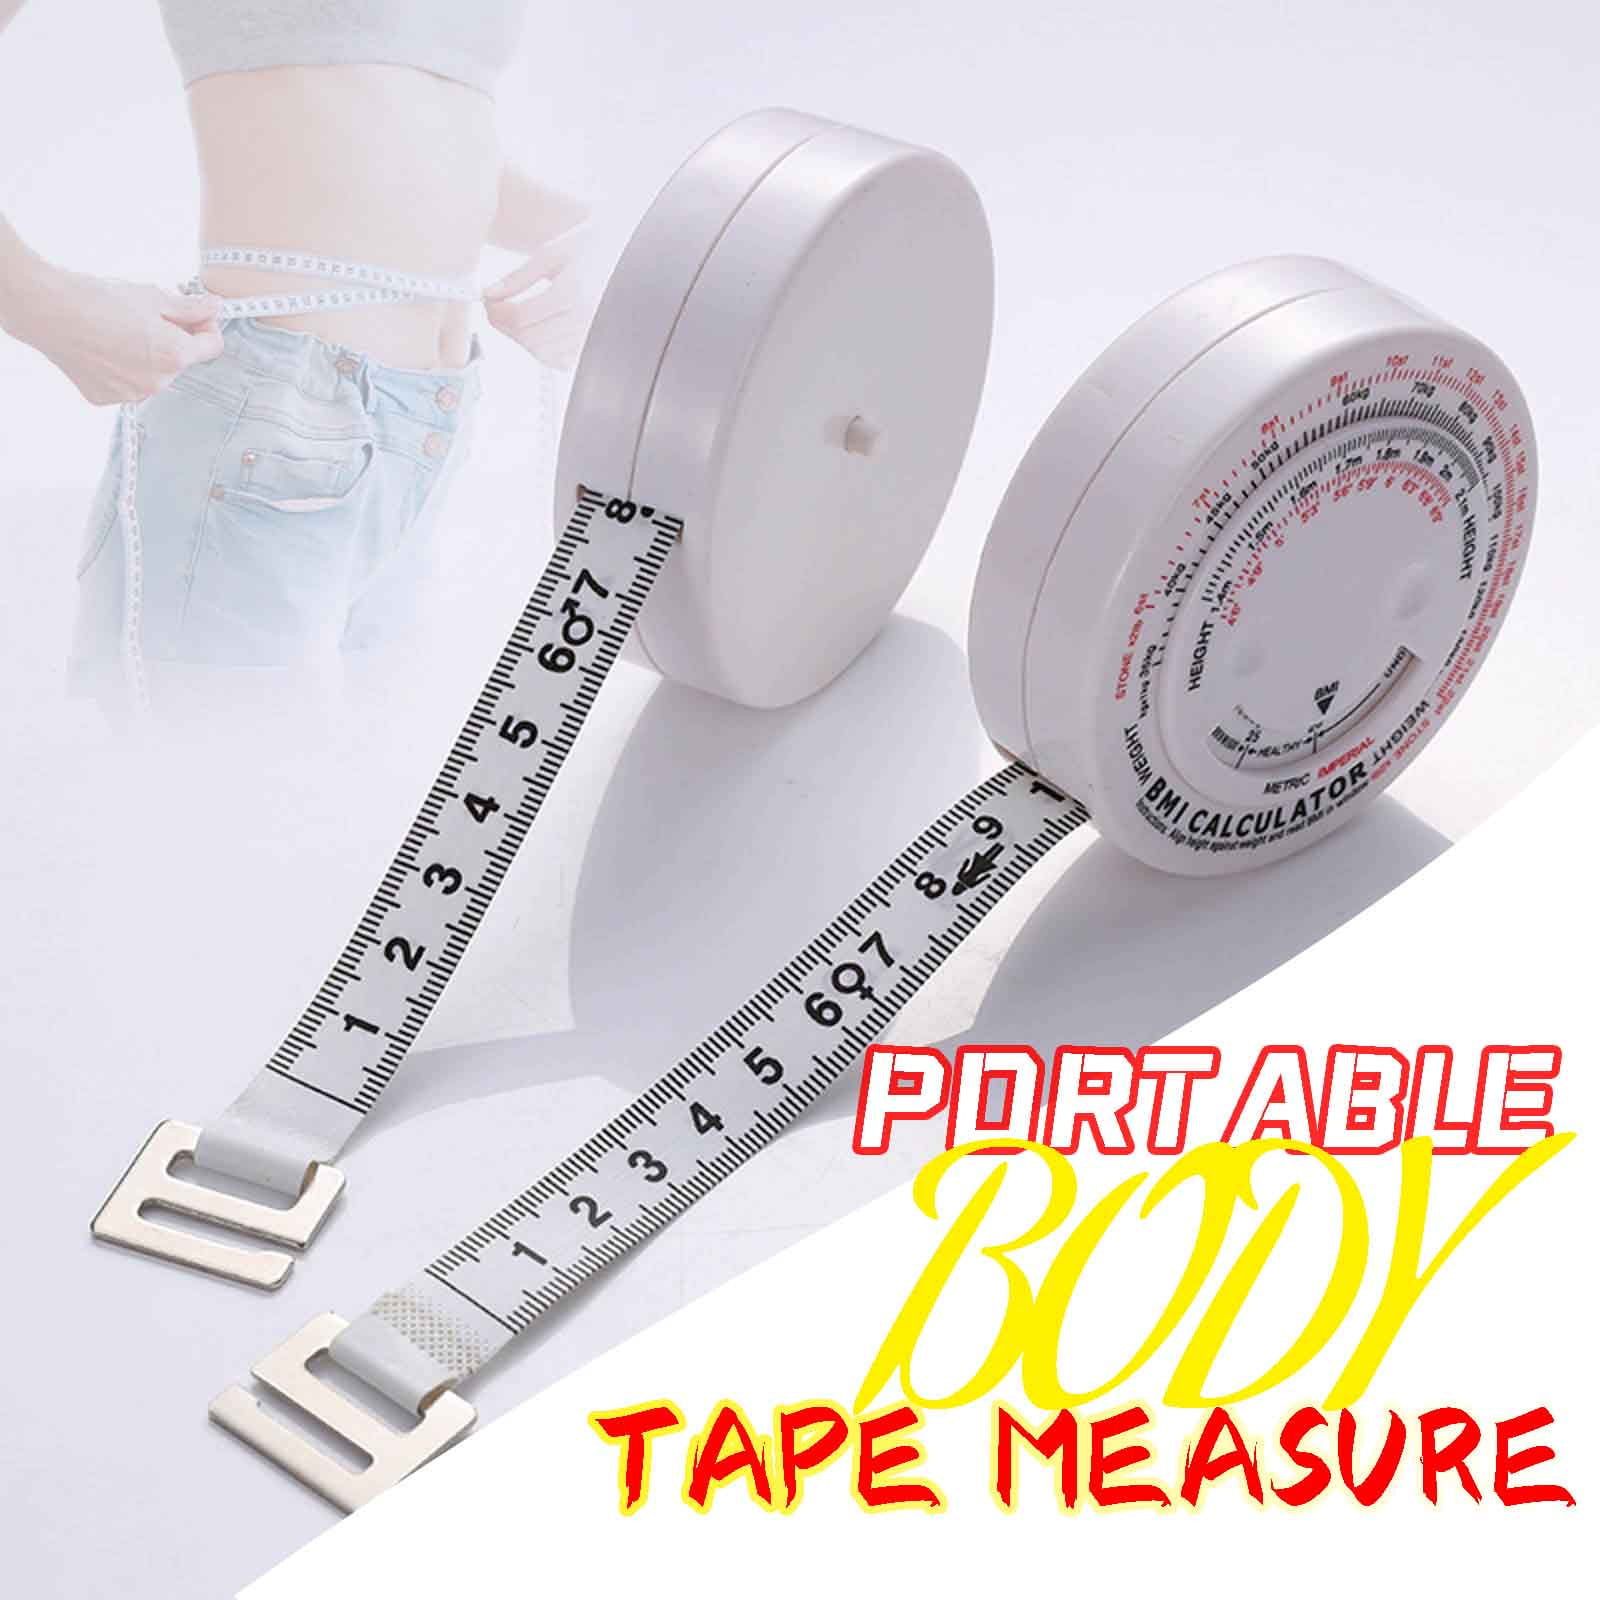 1pc Automatic Measuring Tape For Body Measurements, Waist/arm/leg/bust/circumference/head  Measuring Handheld Device For Home Use